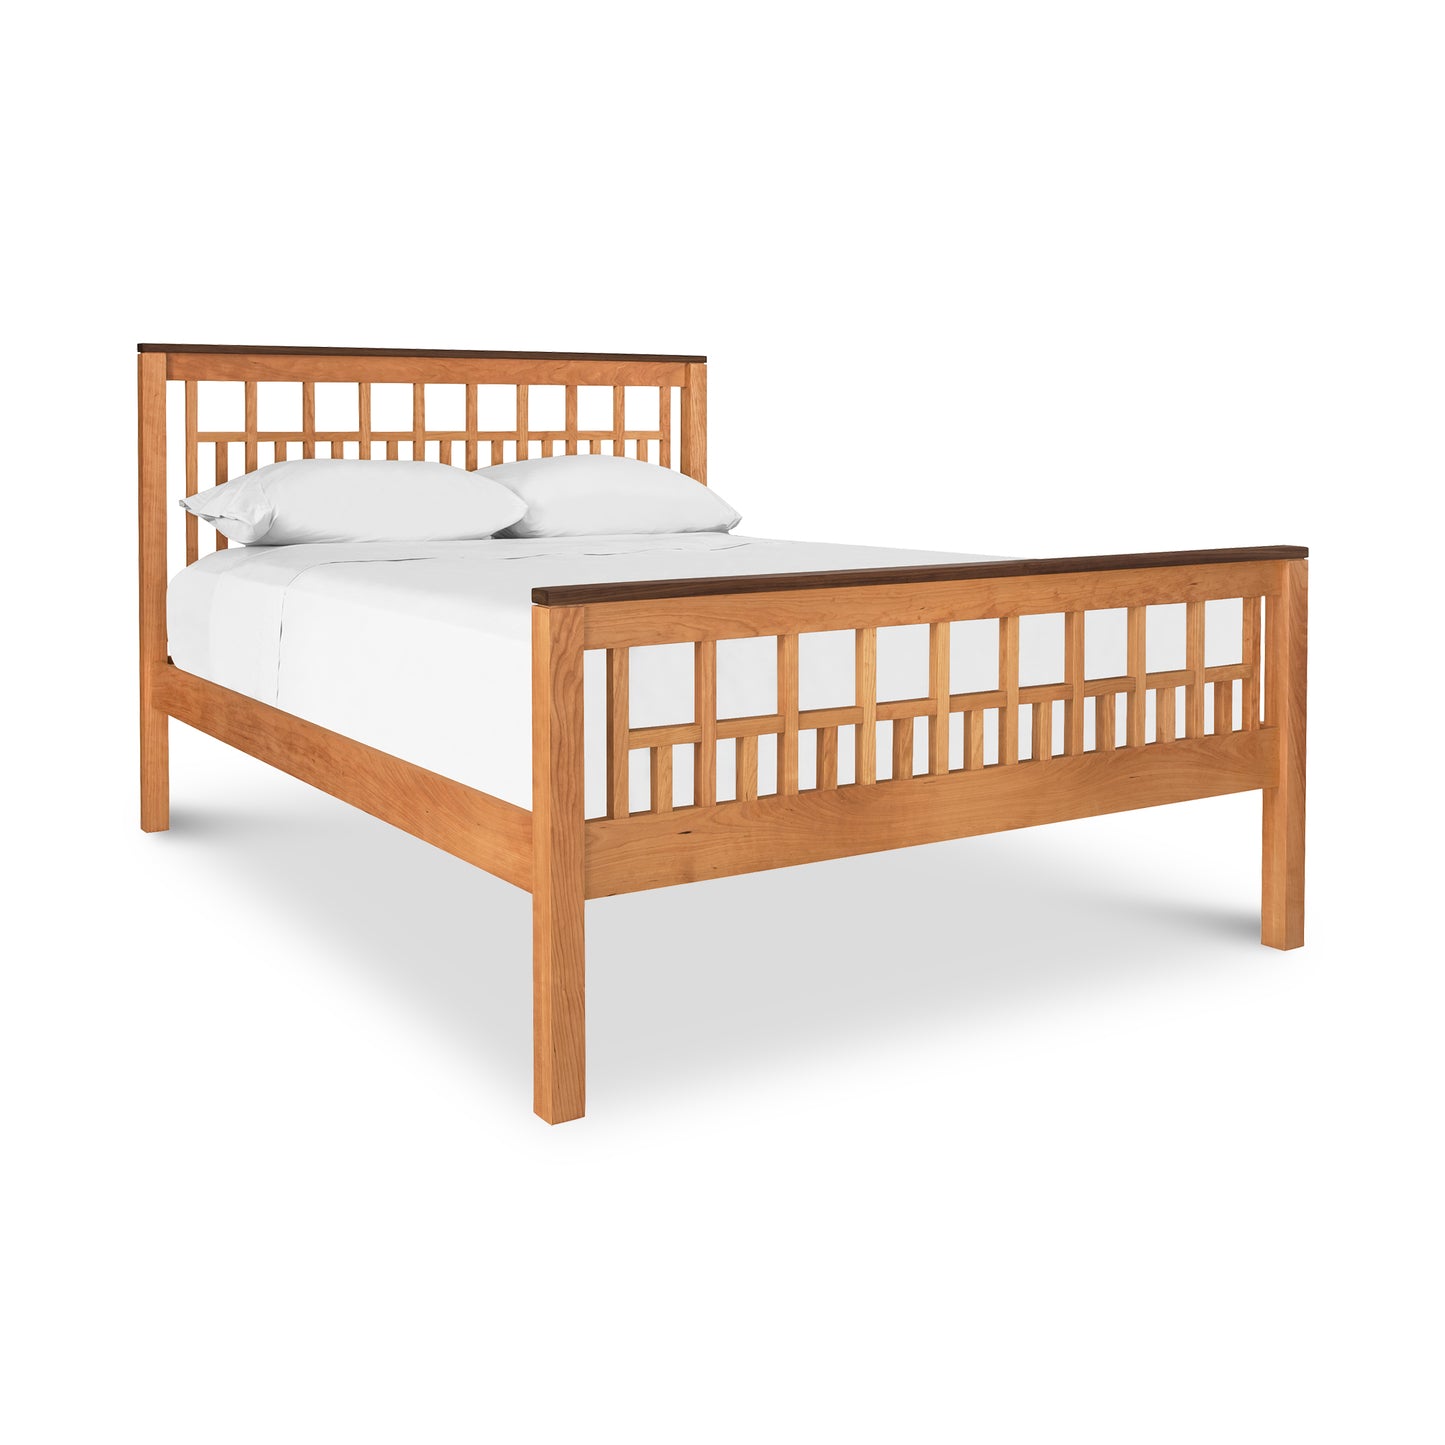 A Vermont Furniture Designs Modern American Trellis Bed frame, constructed from solid hardwoods with a slatted headboard and footboard, furnished with white bedding and featuring an eco-friendly finish, isolated on a white background